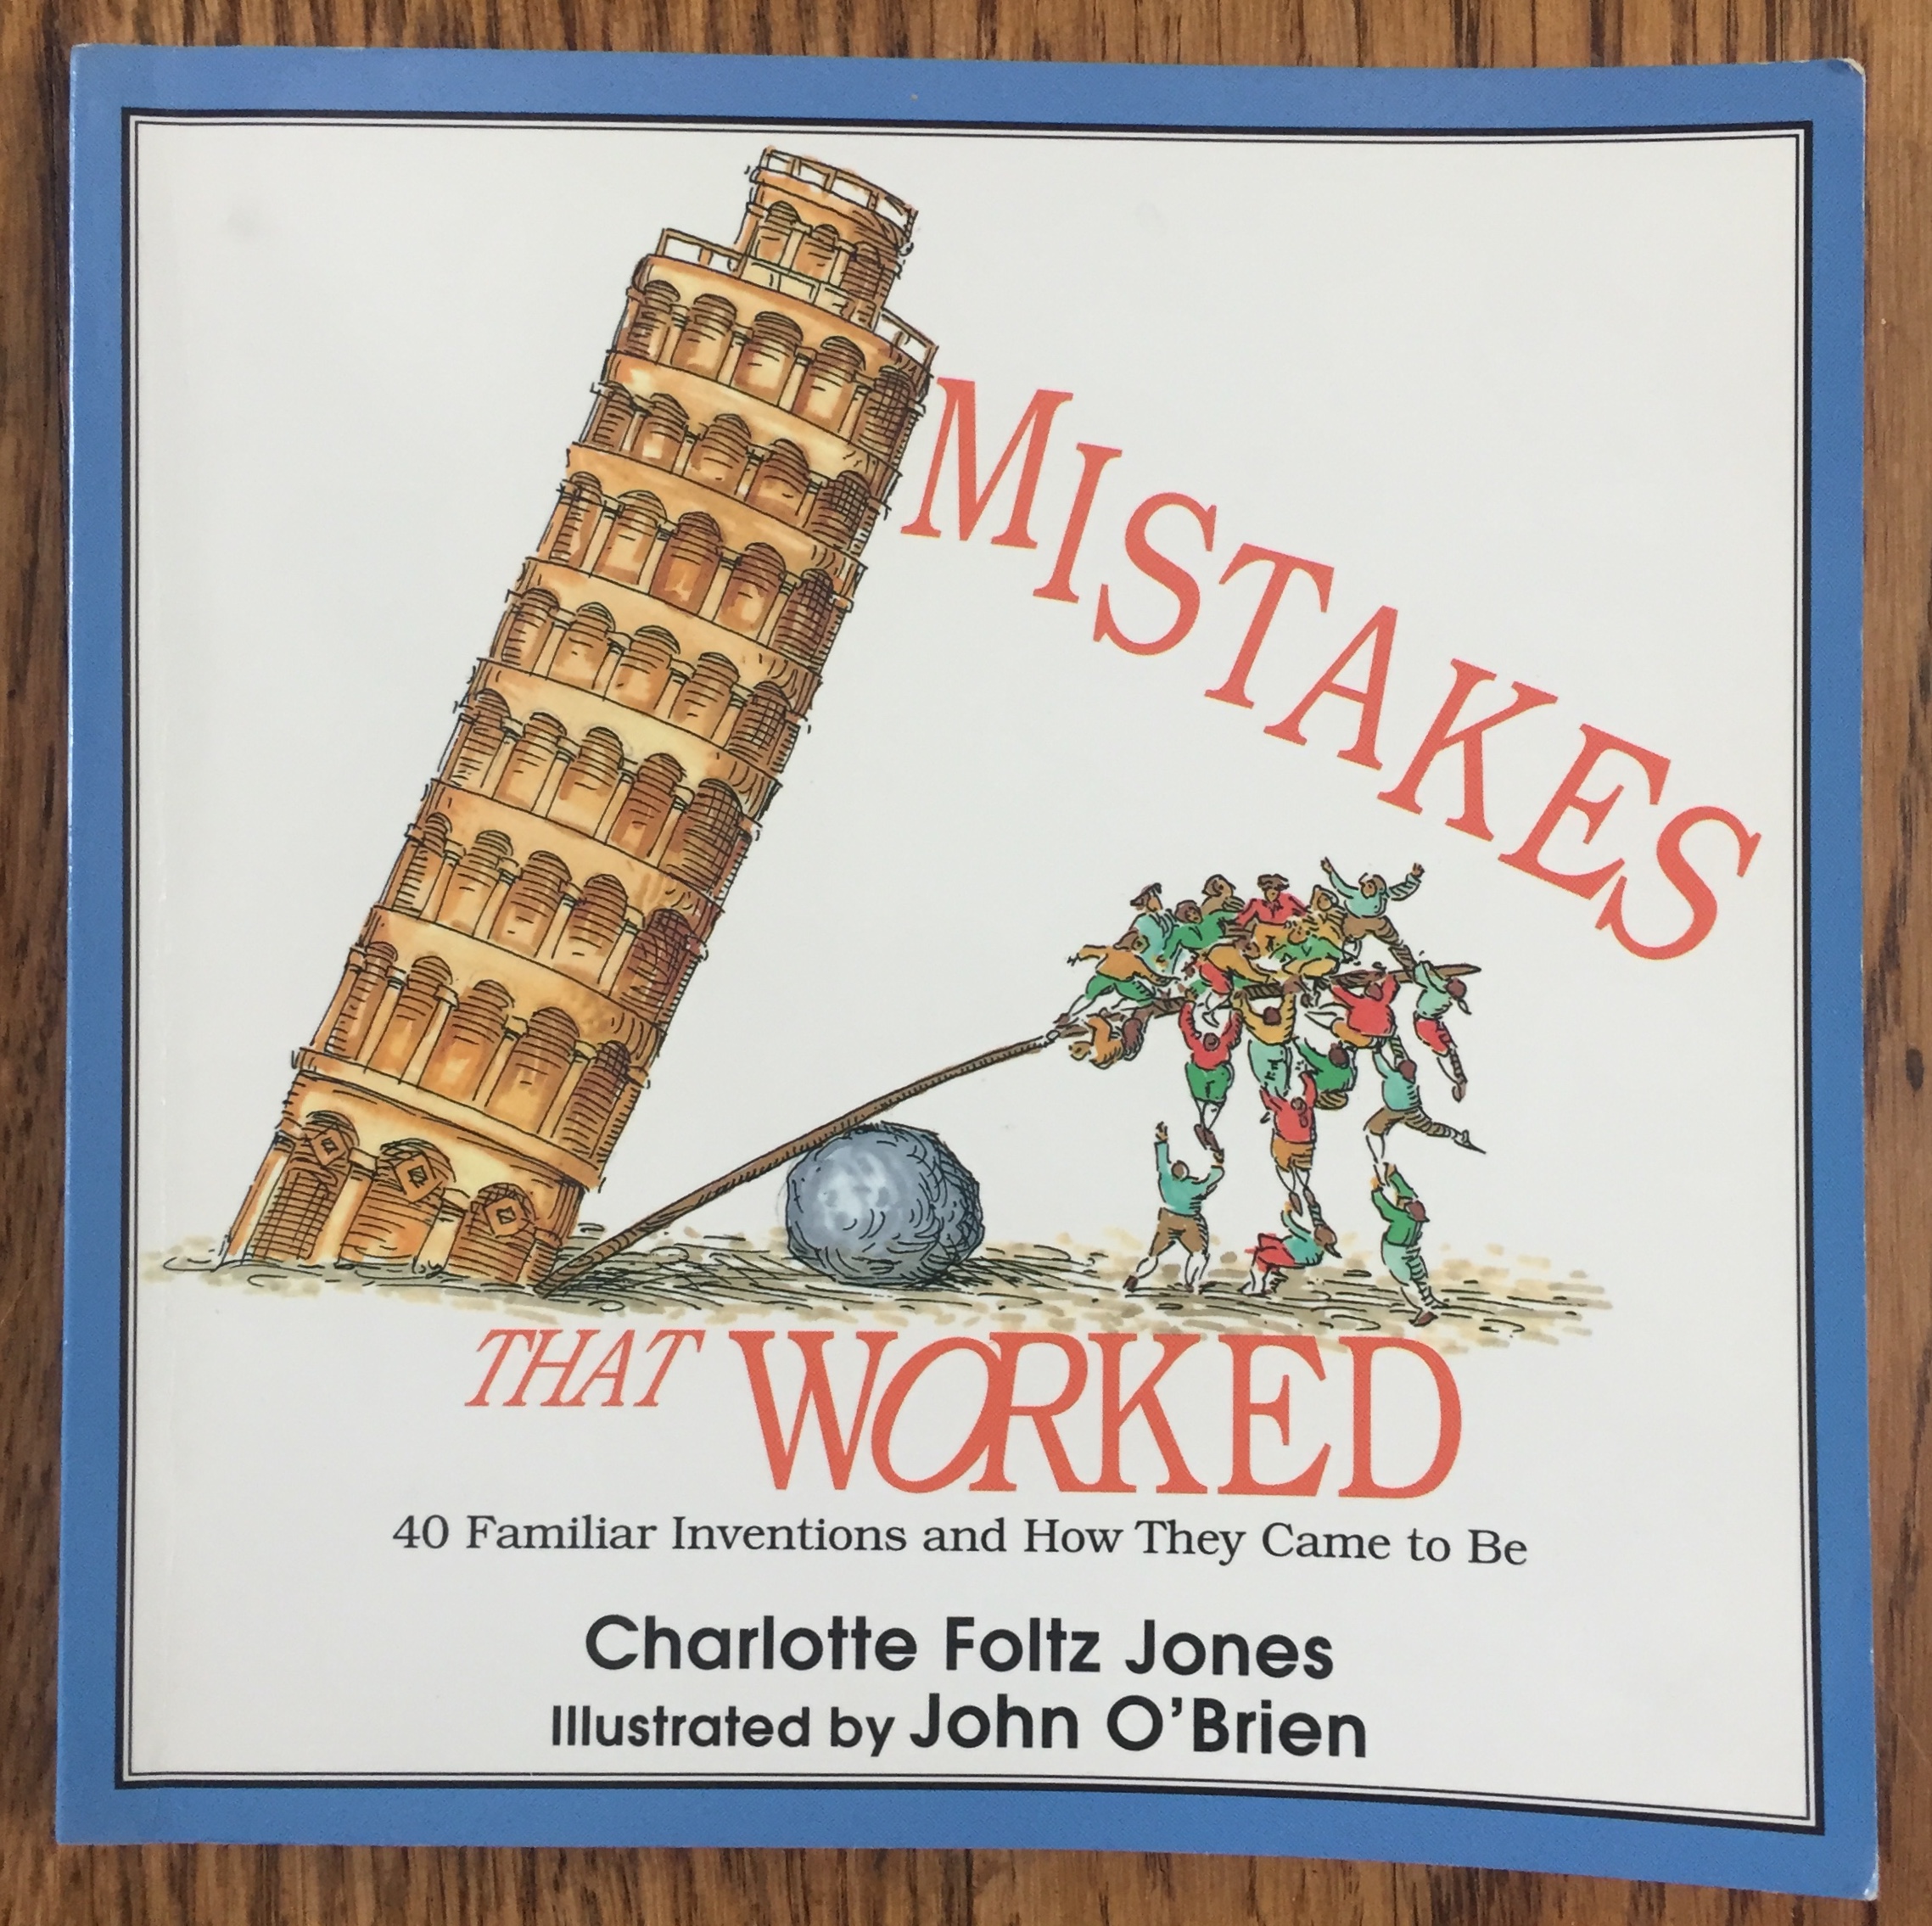 Mistakes That Worked books by Charlotte Foltz Jones cover